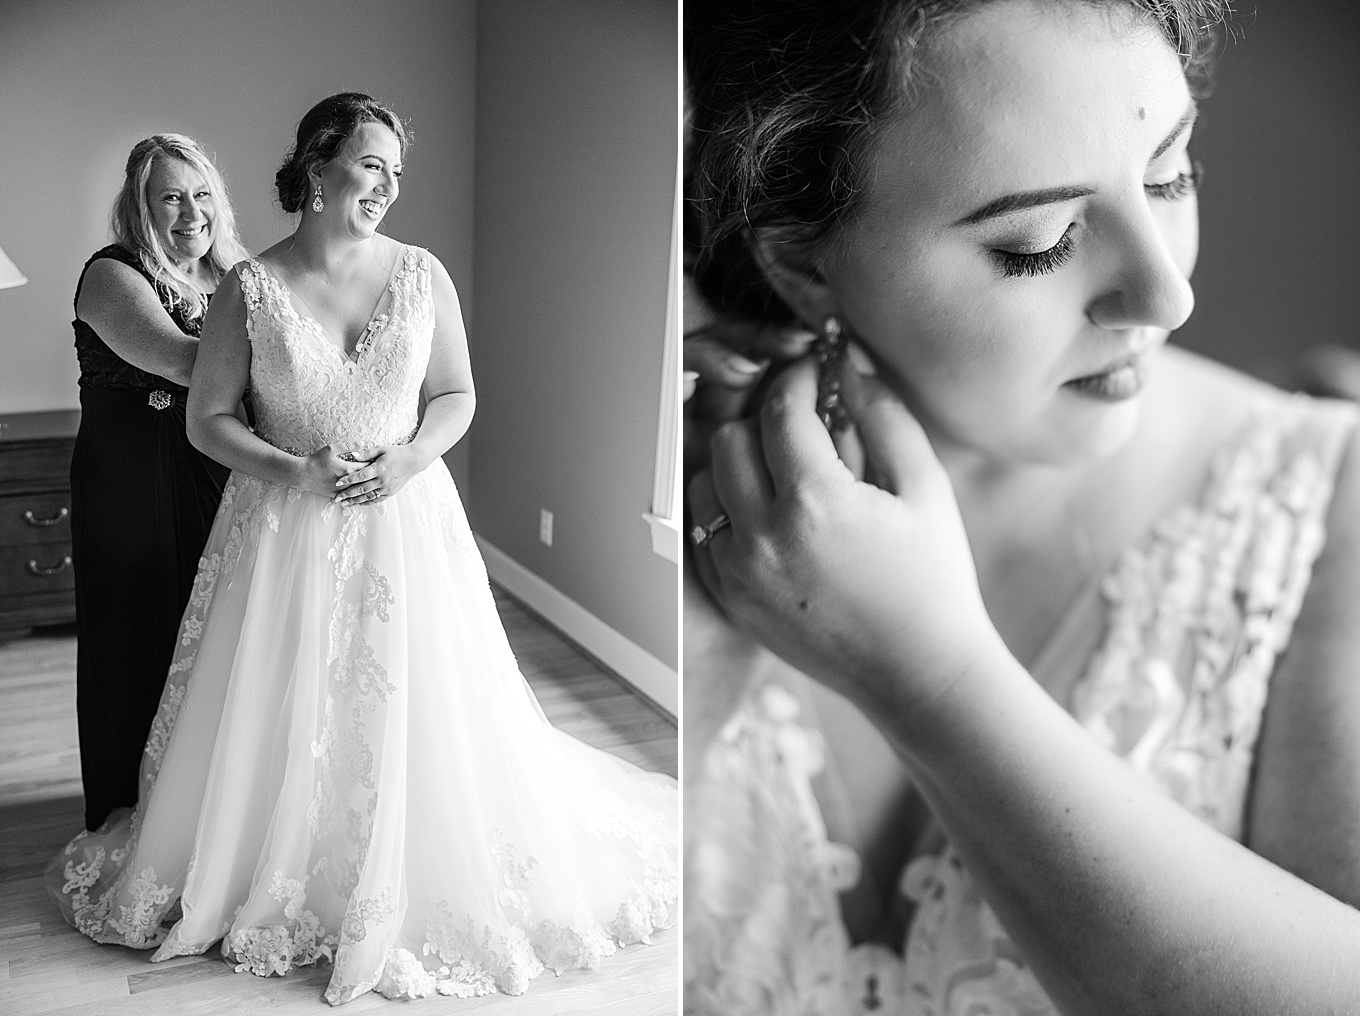 Kevin + Emily - Katelyn James | Online Educator for Photographers and ...